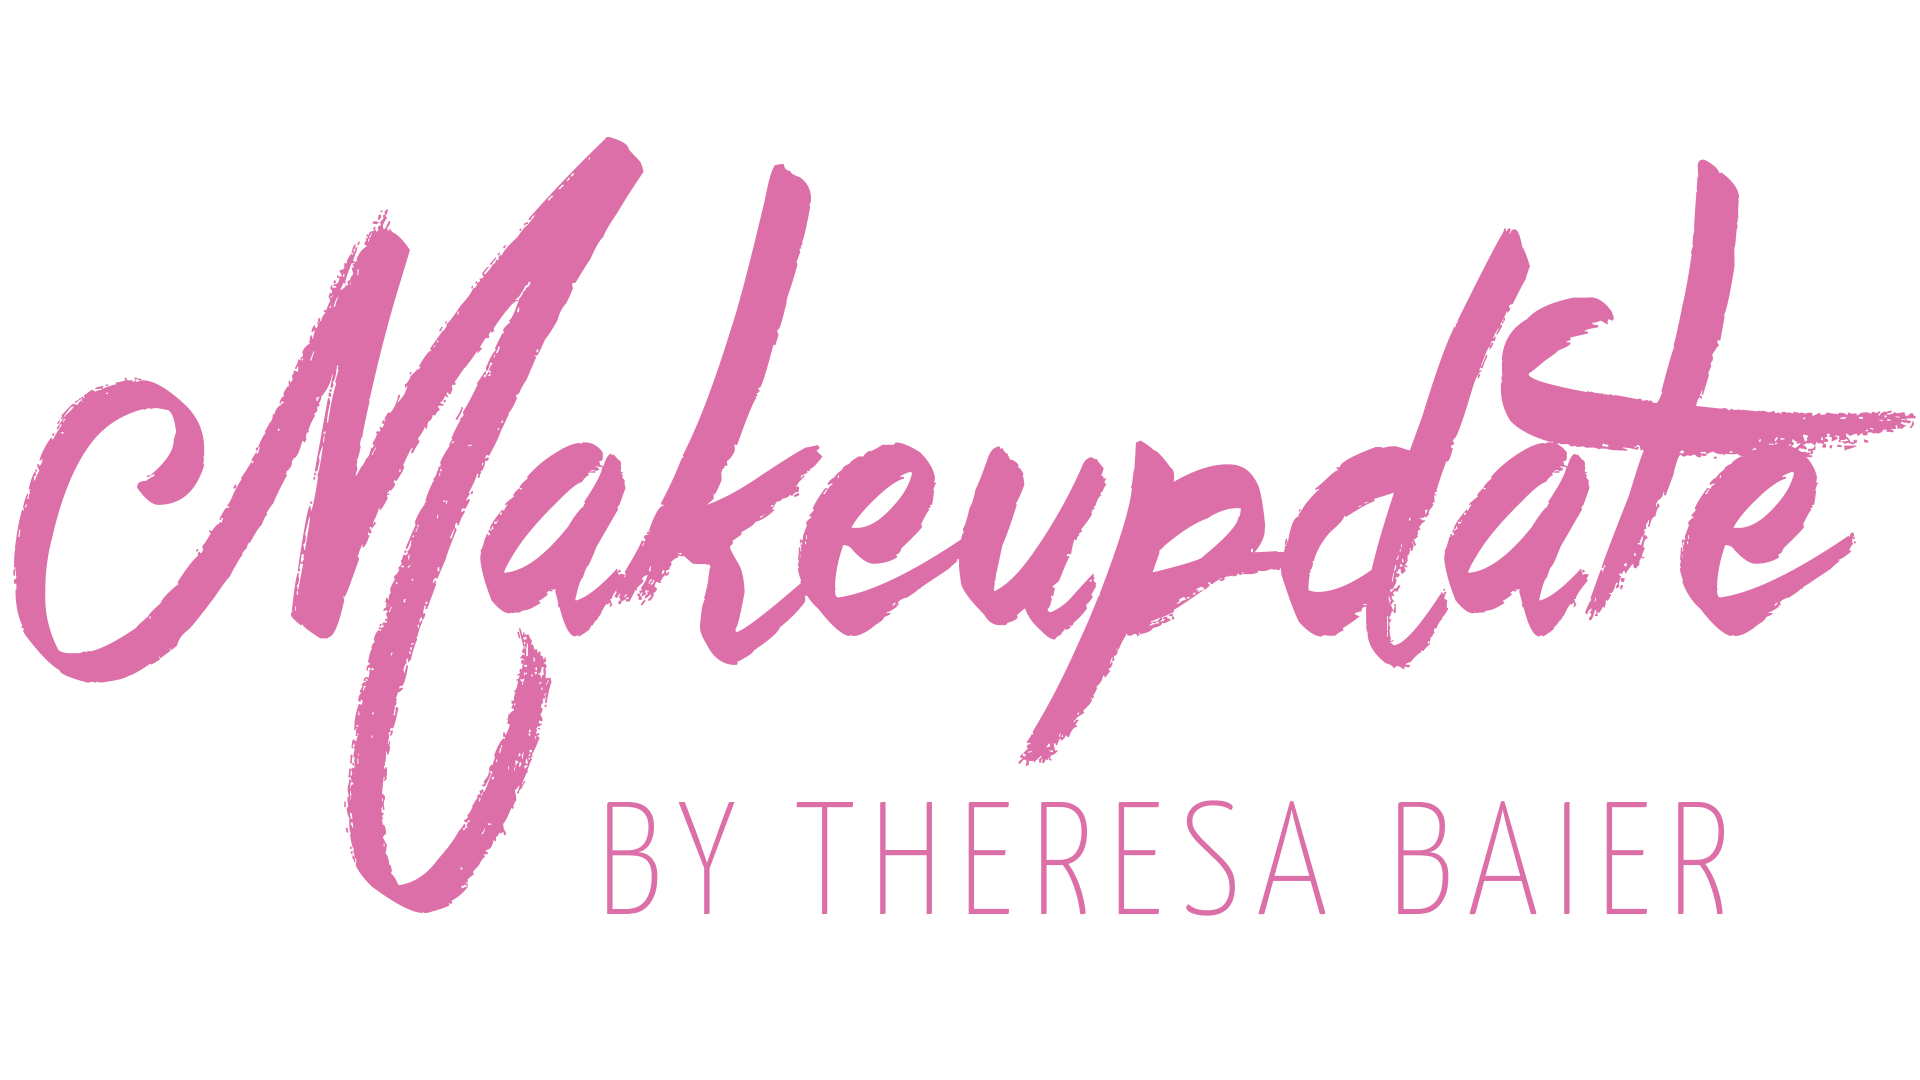 Makeupdate by Theresa Baier